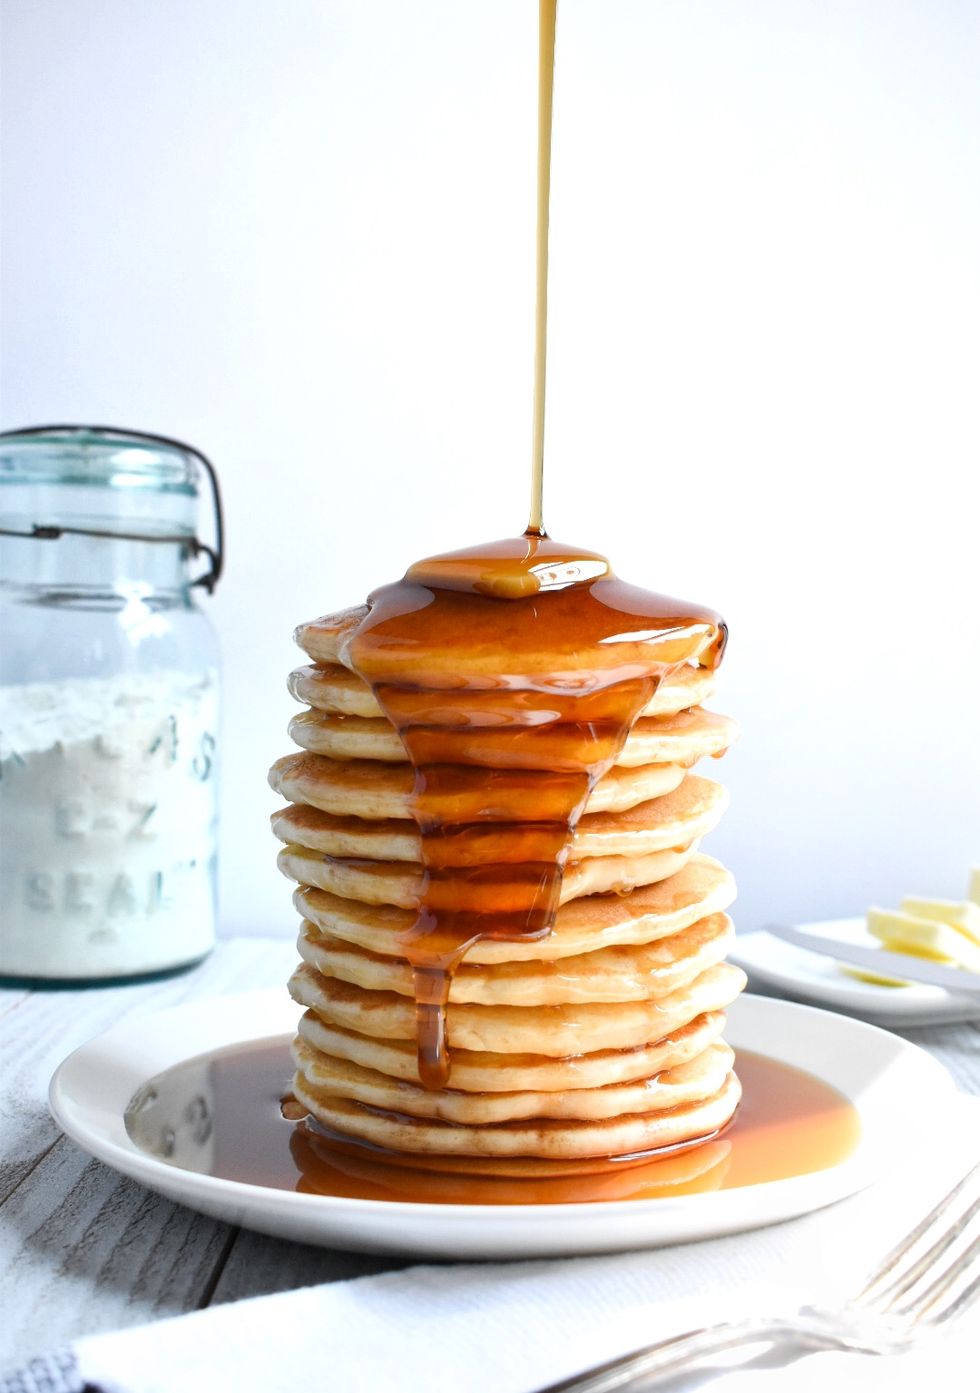 tall stack of pancakes with syrup being poured over them on a white plate alonside a fork, white napkin, a jar of flour and a dish of butter